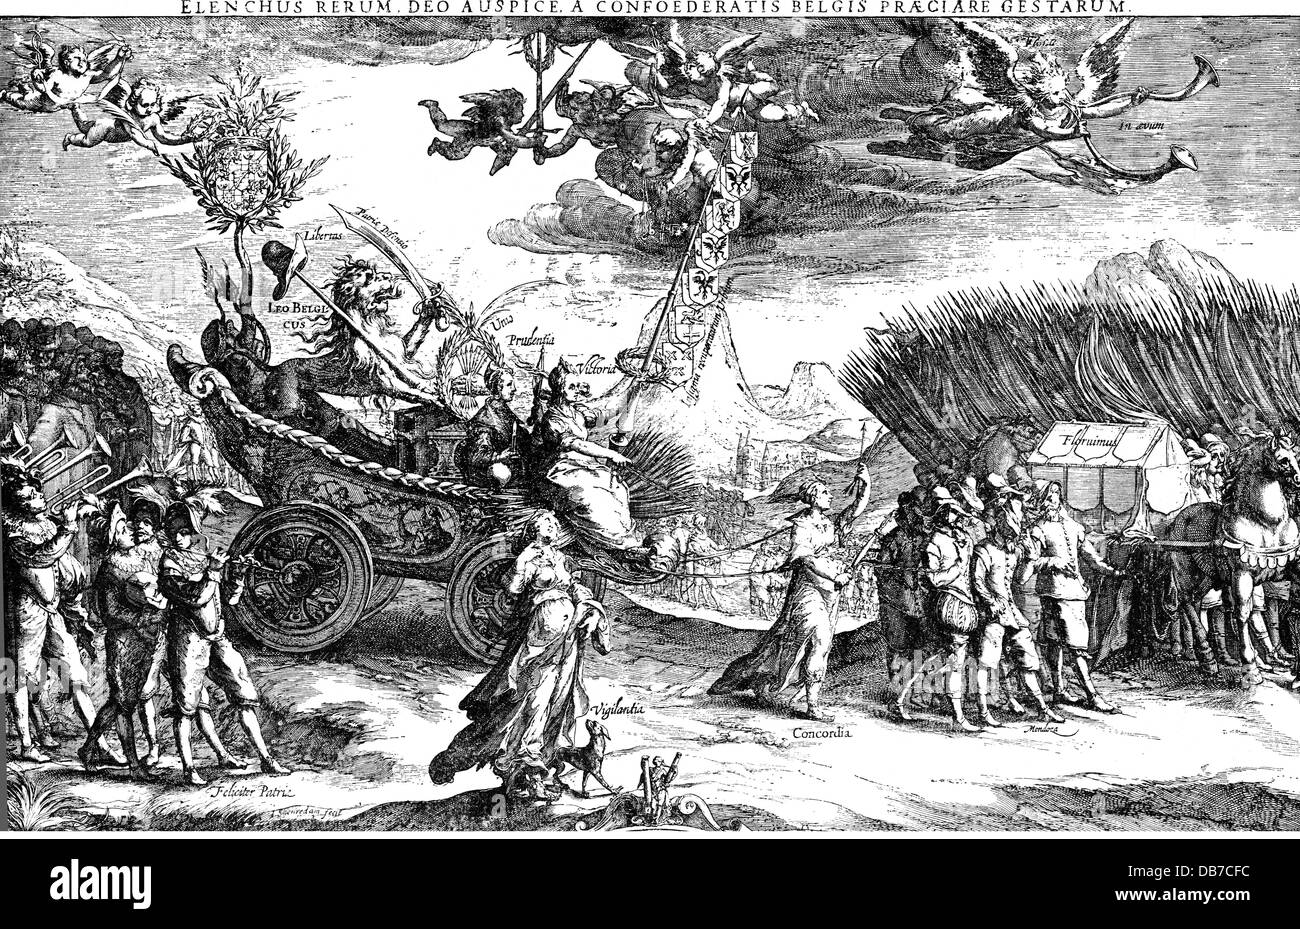 Eighty Years' War 1568 - 1648, allegory, Triumpf of the Dutch over the Spanish, copper engraving by Joannes Saenredam, 1600, Spanish Dutch War, Spanish Netherlands, Belgium, Belgian lion, angel, angels, chariot, army, armies, army, armies, Spain, insurgency, revolt, rebellion, insurgencies, revolts, rebellions, in revolt, 16th century, historic, historical, people, Artist's Copyright has not to be cleared Stock Photo